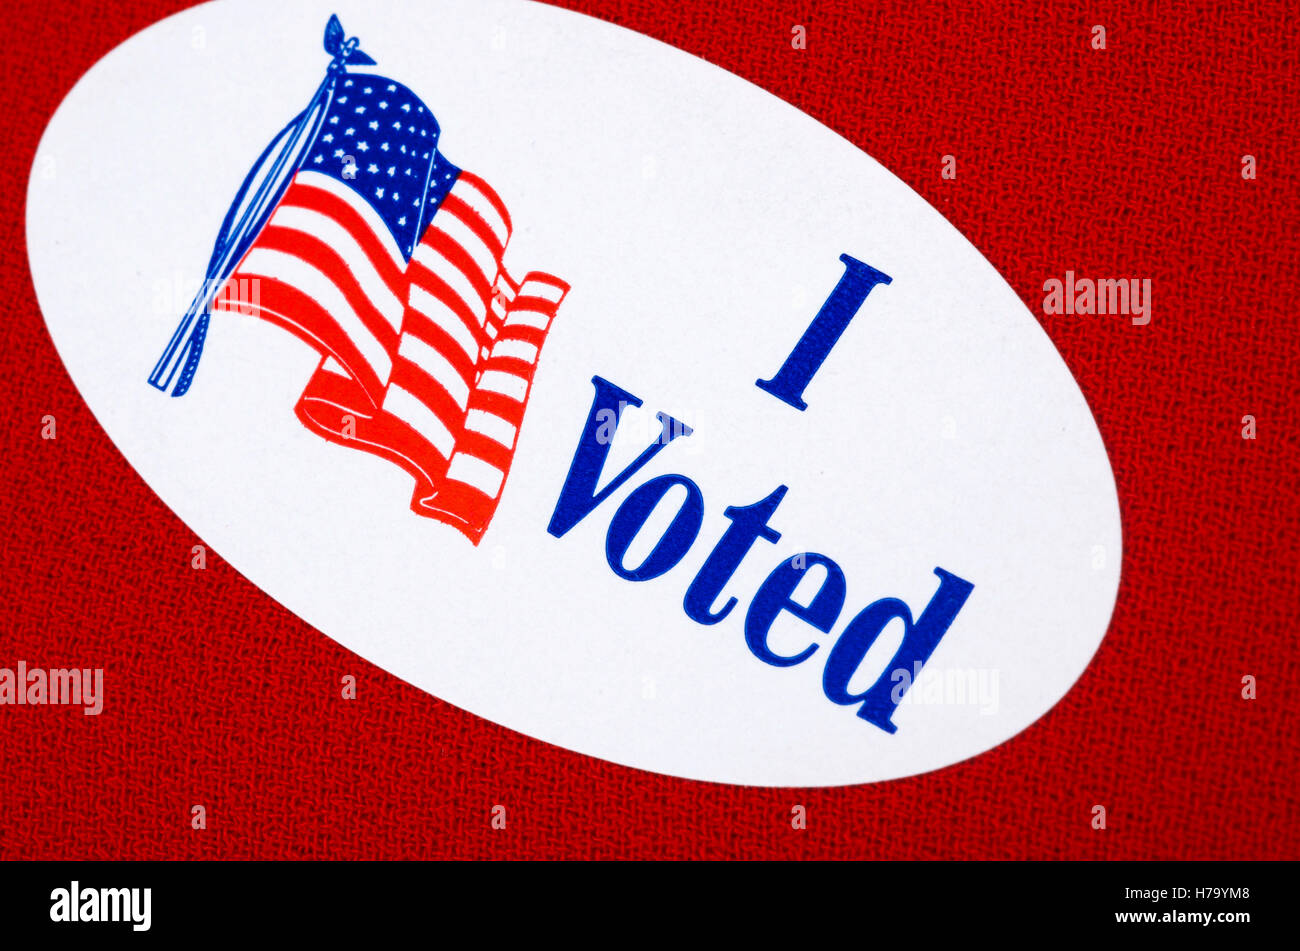 Voter Sticker 'I Voted' on red or blue Stock Photo